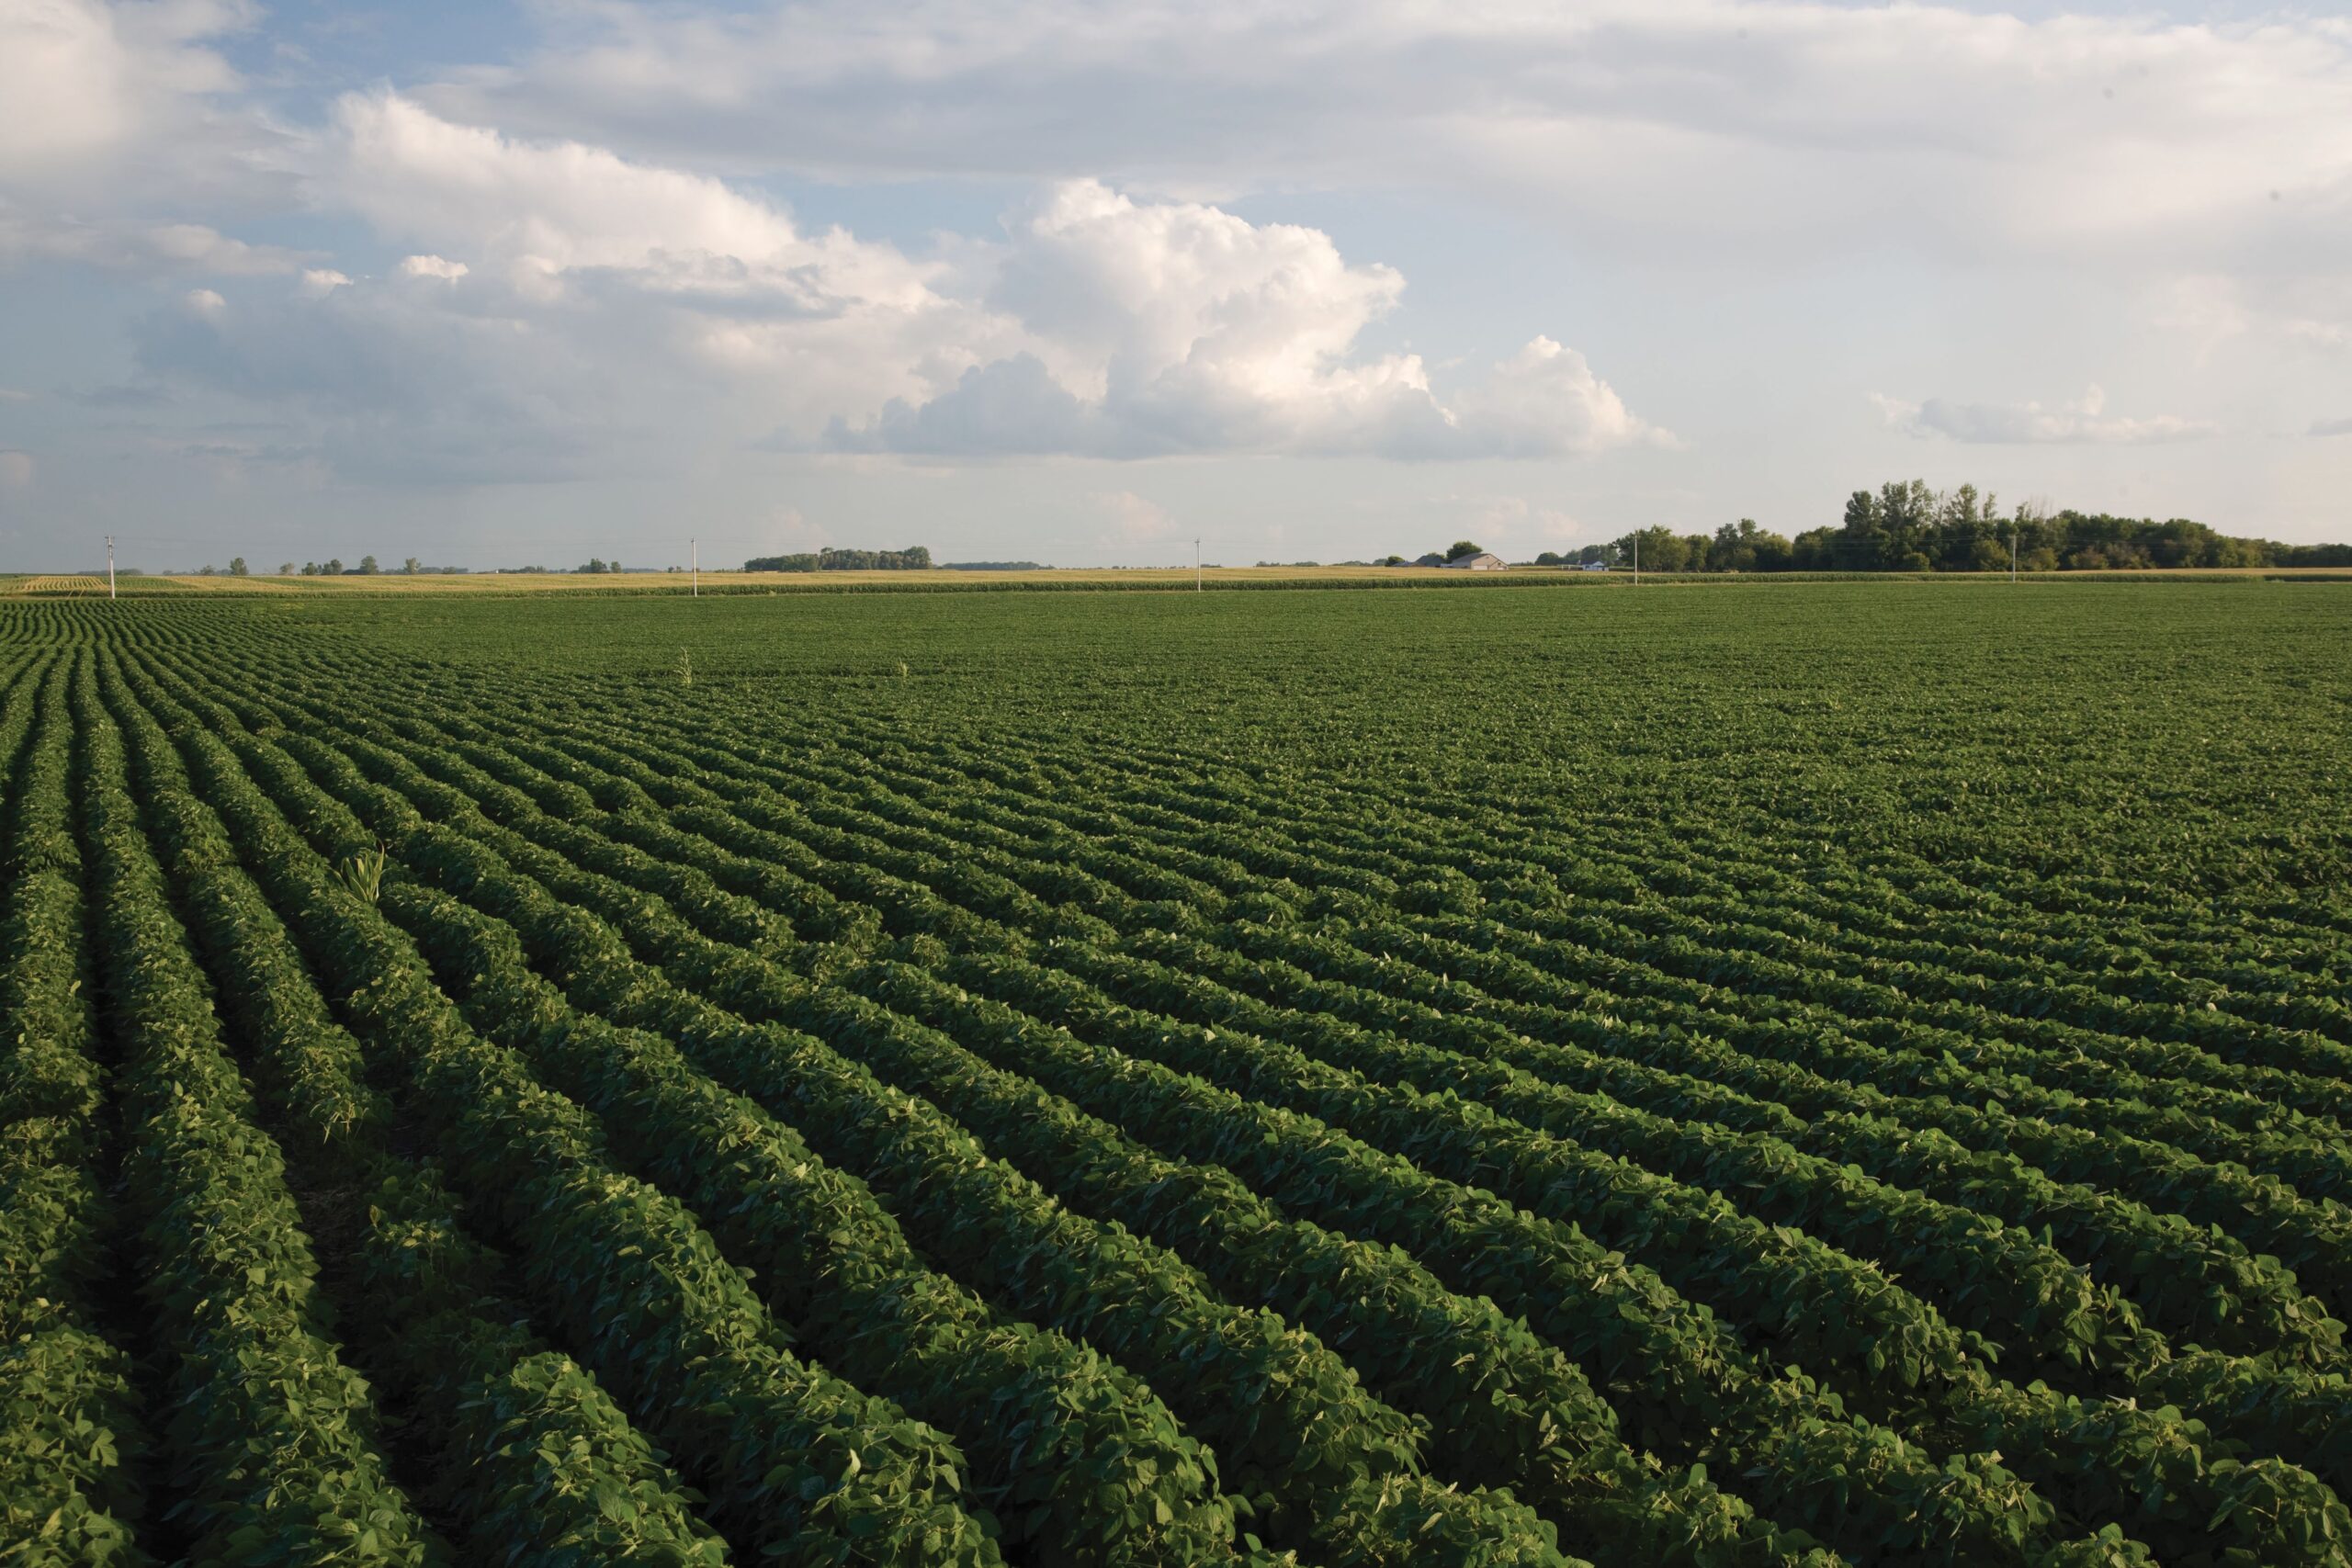 Is it worth applying sulfur to your soybean crop?